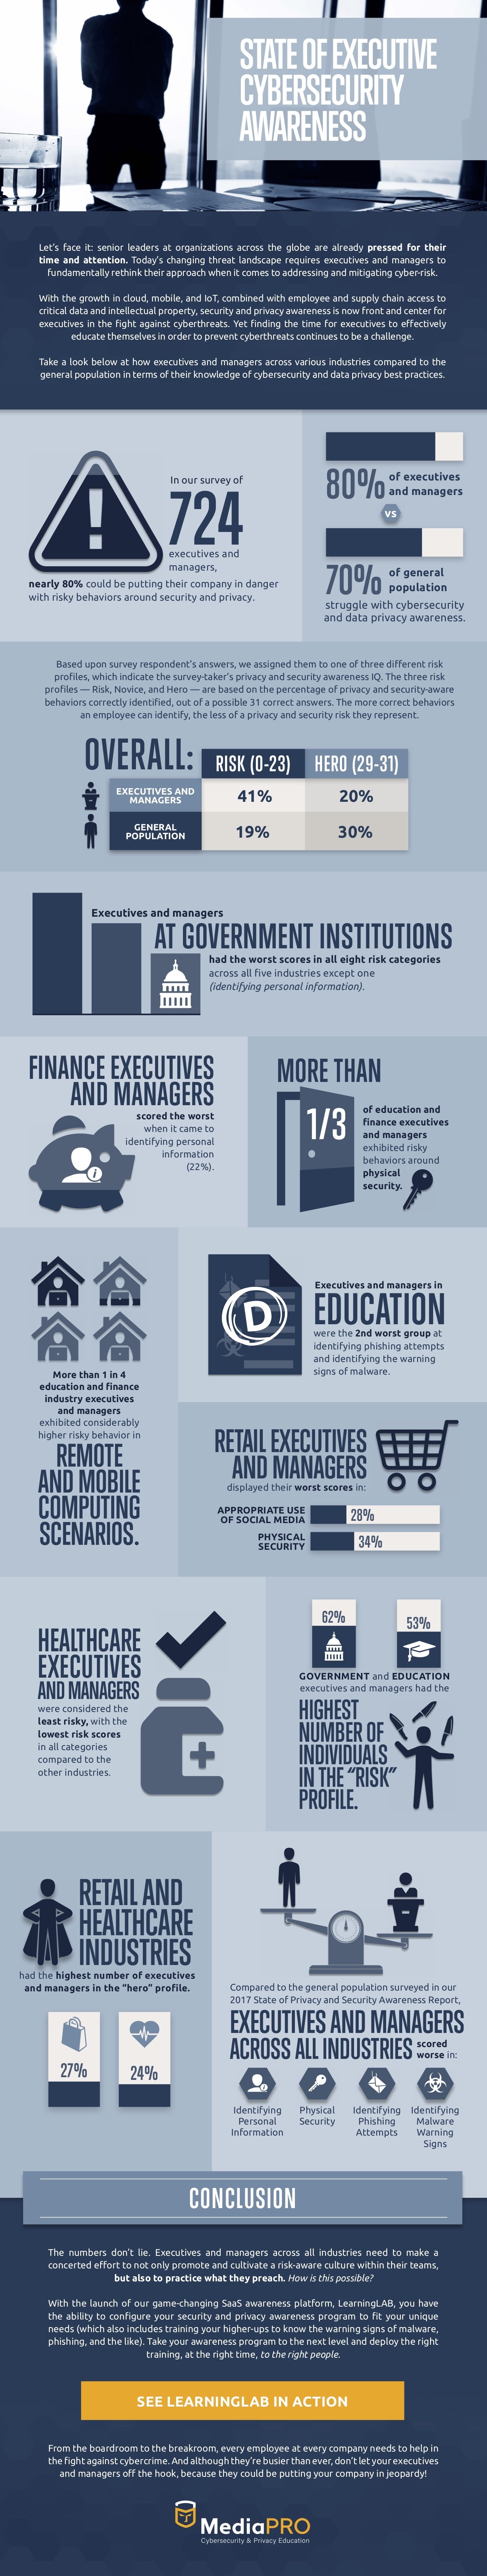 State Of Executive Cybersecurity Awareness Infographic